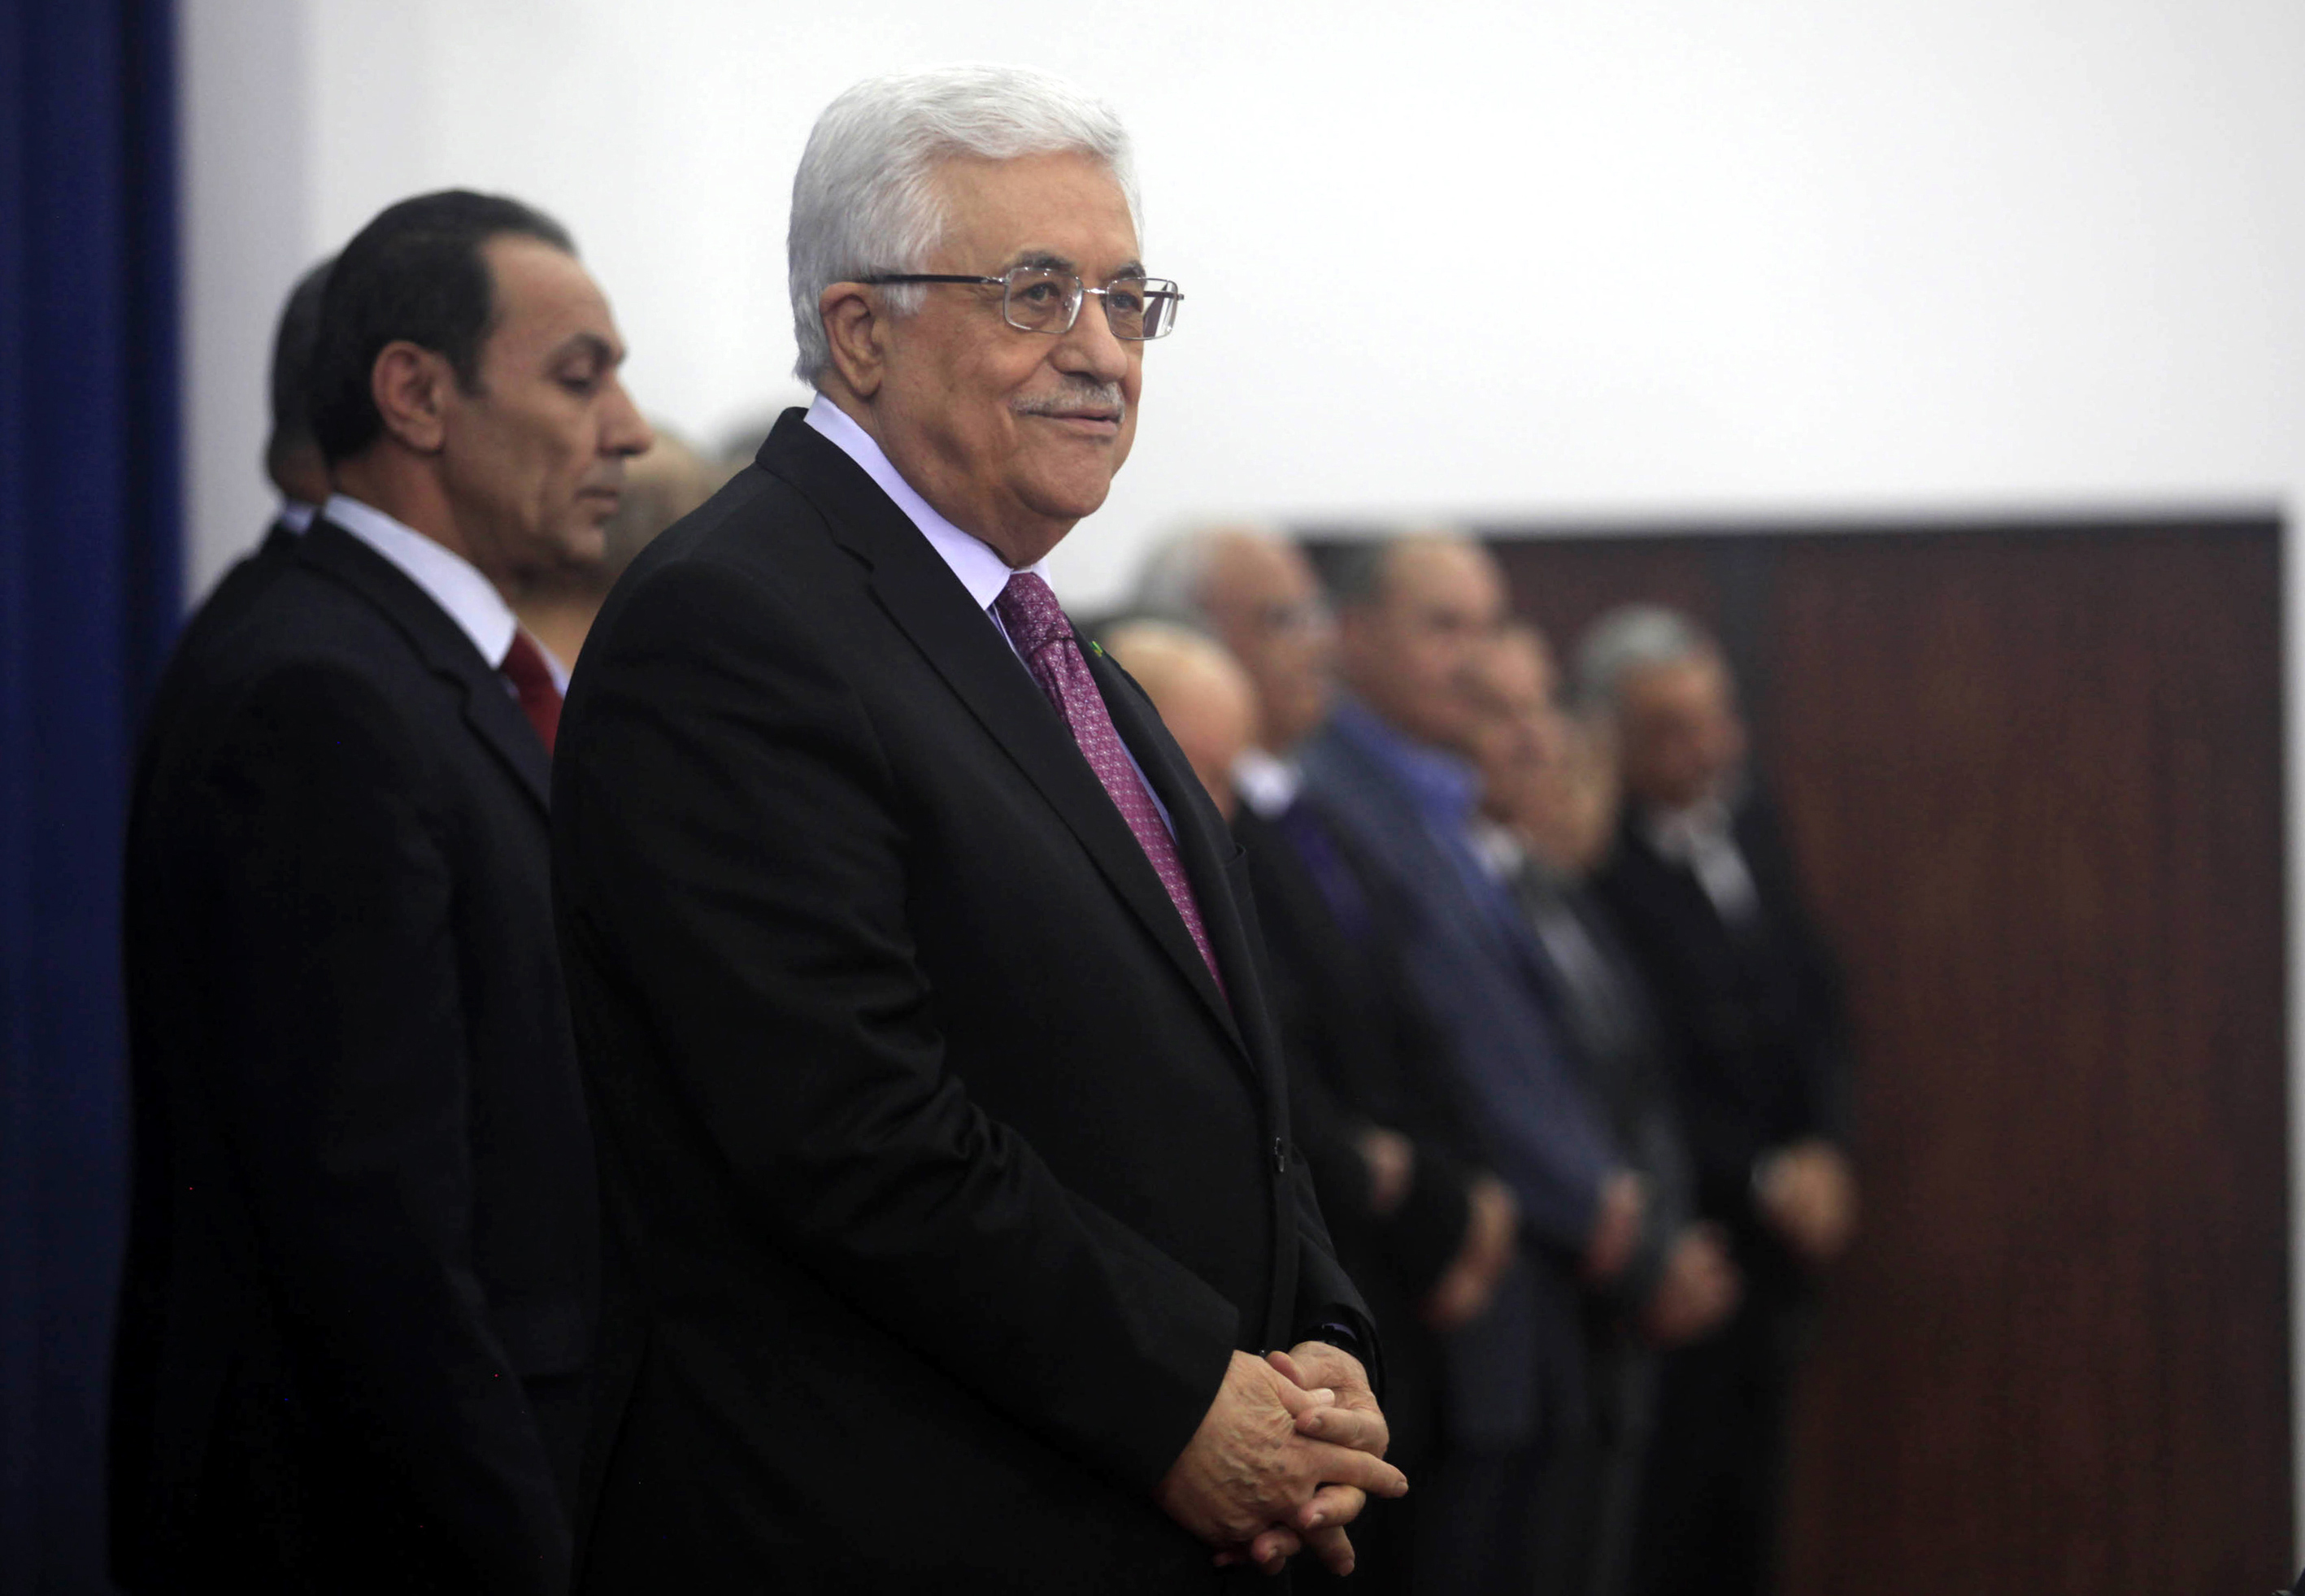 Palestinian President Mahmoud Abbas attends the swearing-in ceremony with the new unity government  in the West Bank town of Ramallah on June 02, 2014.